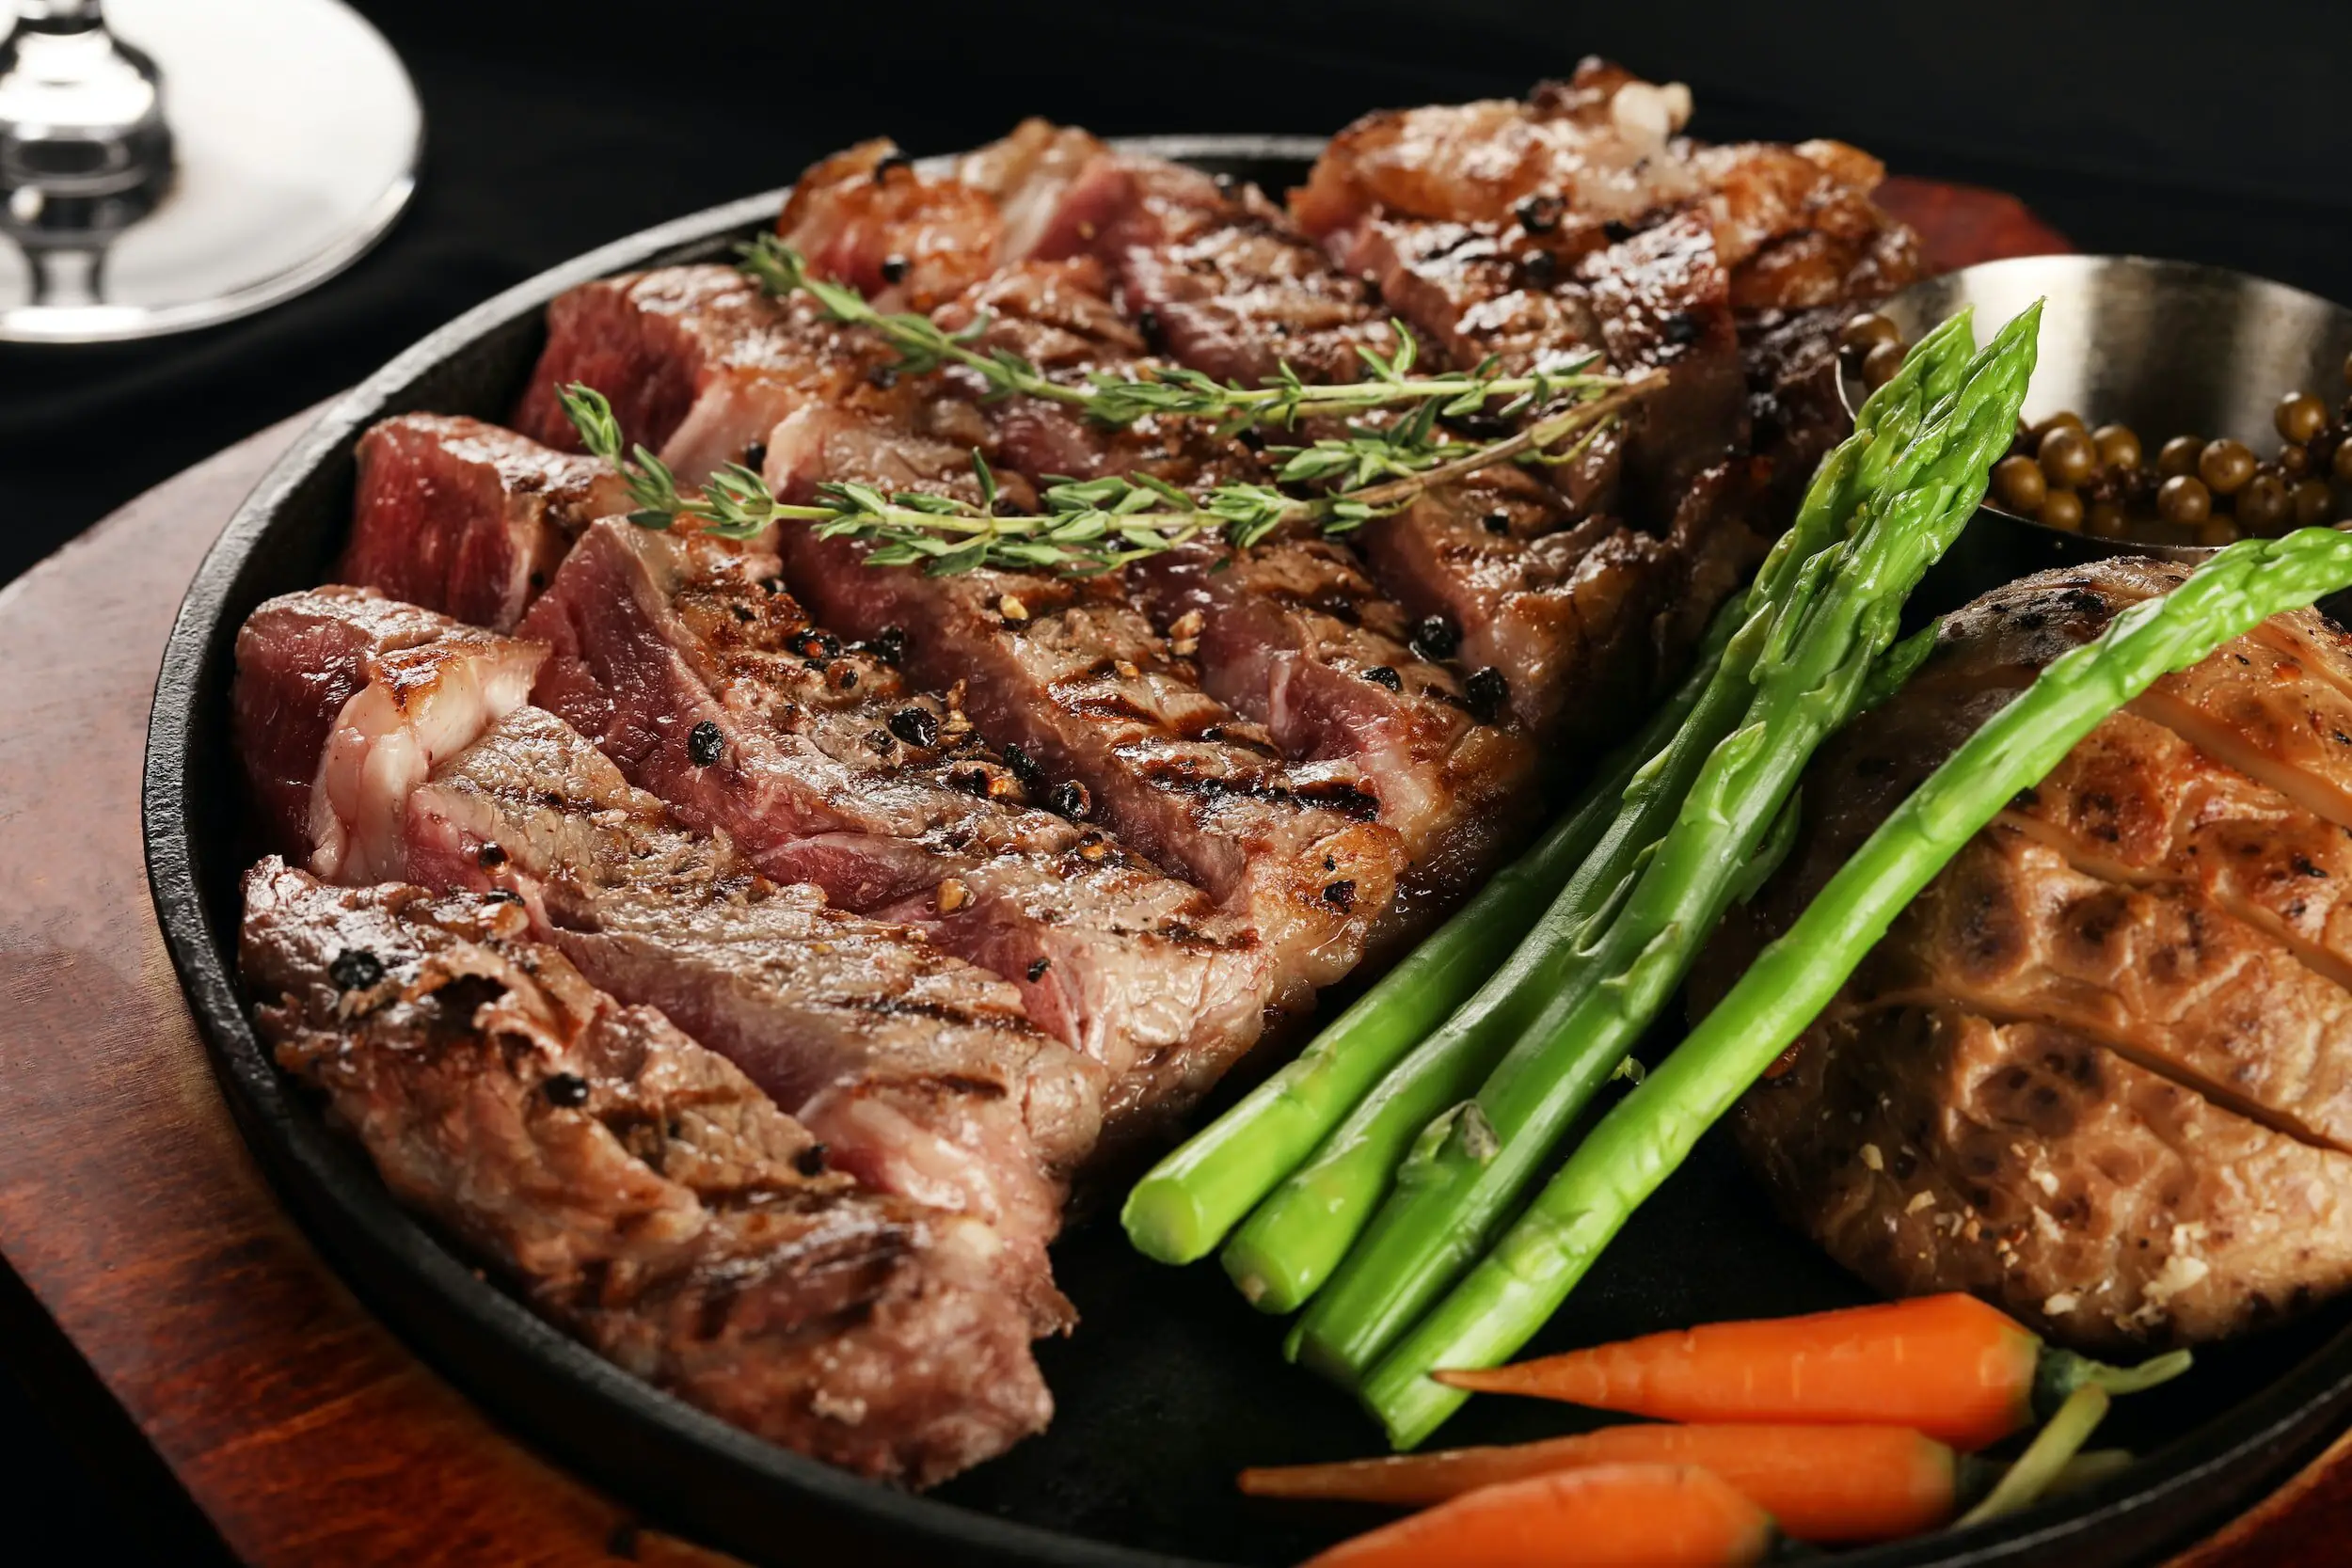 meat dishes that go well with Merlot wine- ribeye steak